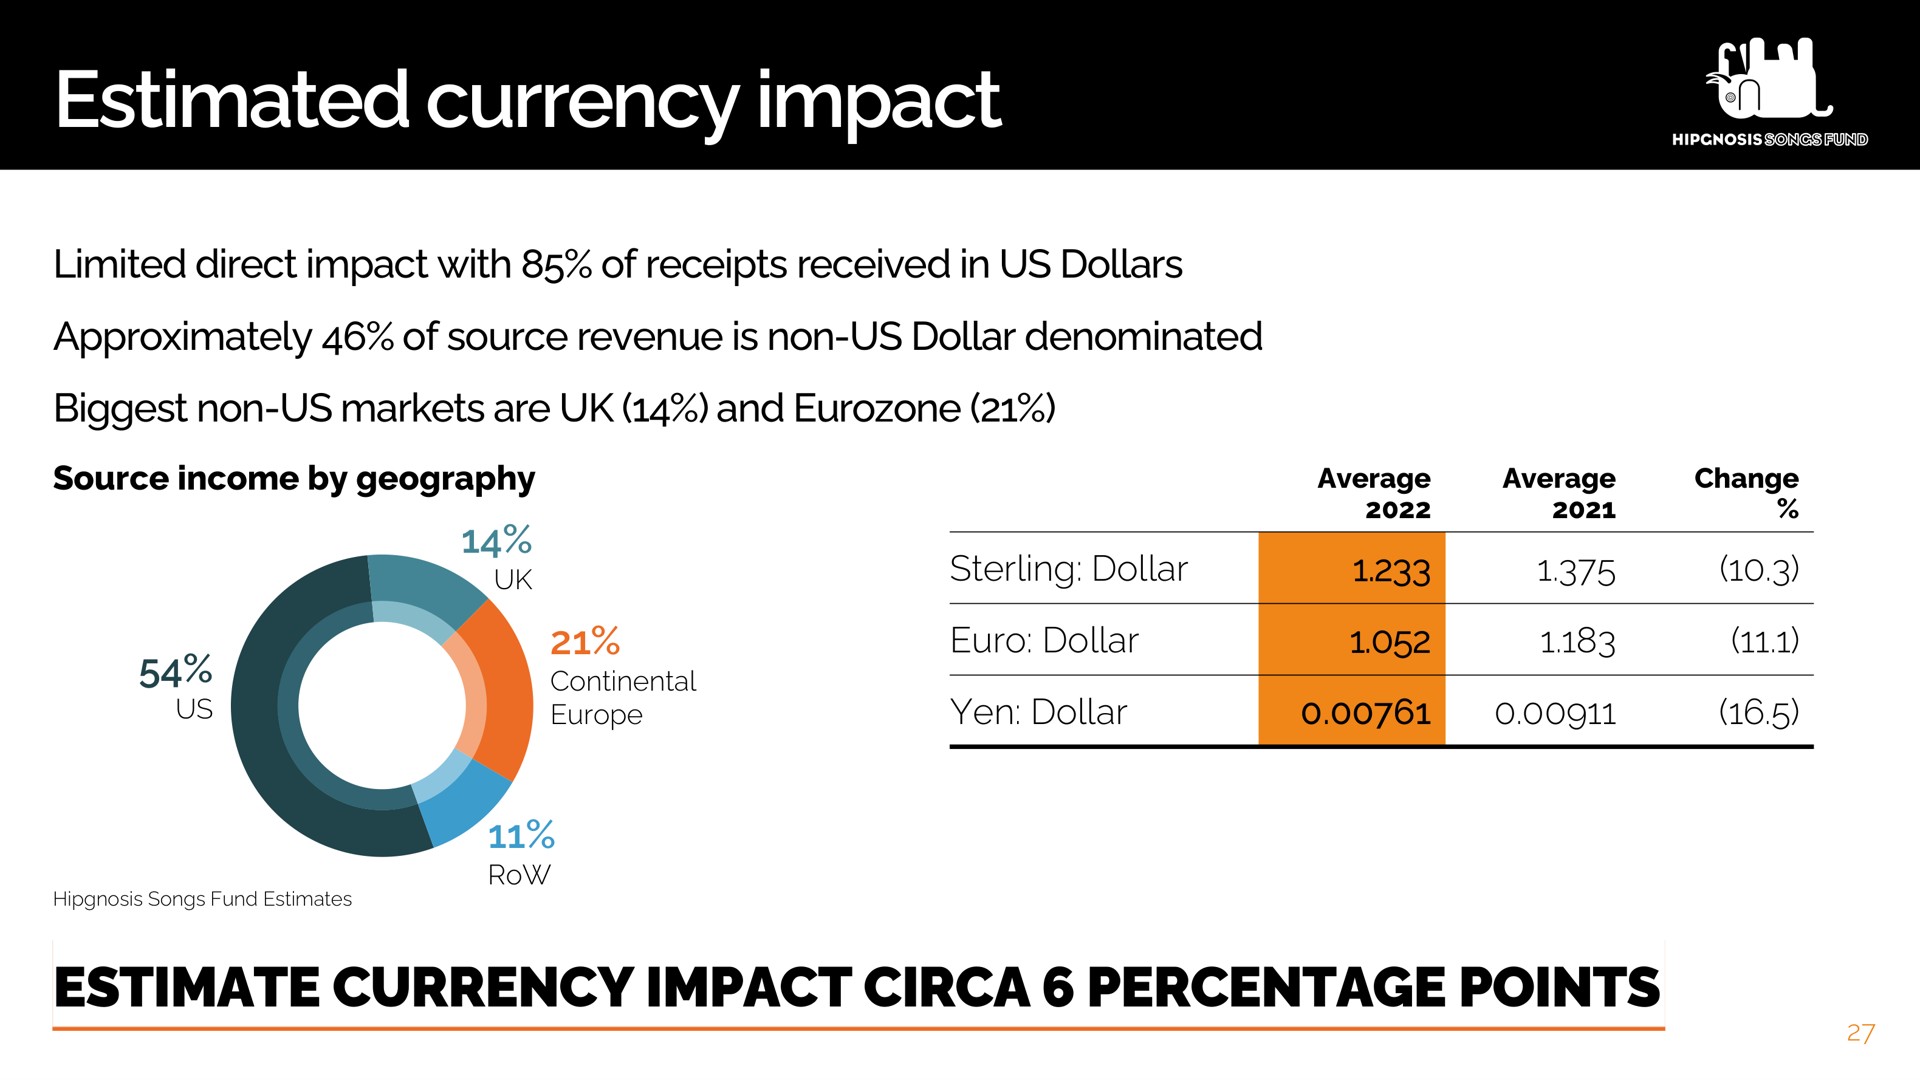 estimated currency impact estimate circa percentage points | Hipgnosis Songs Fund